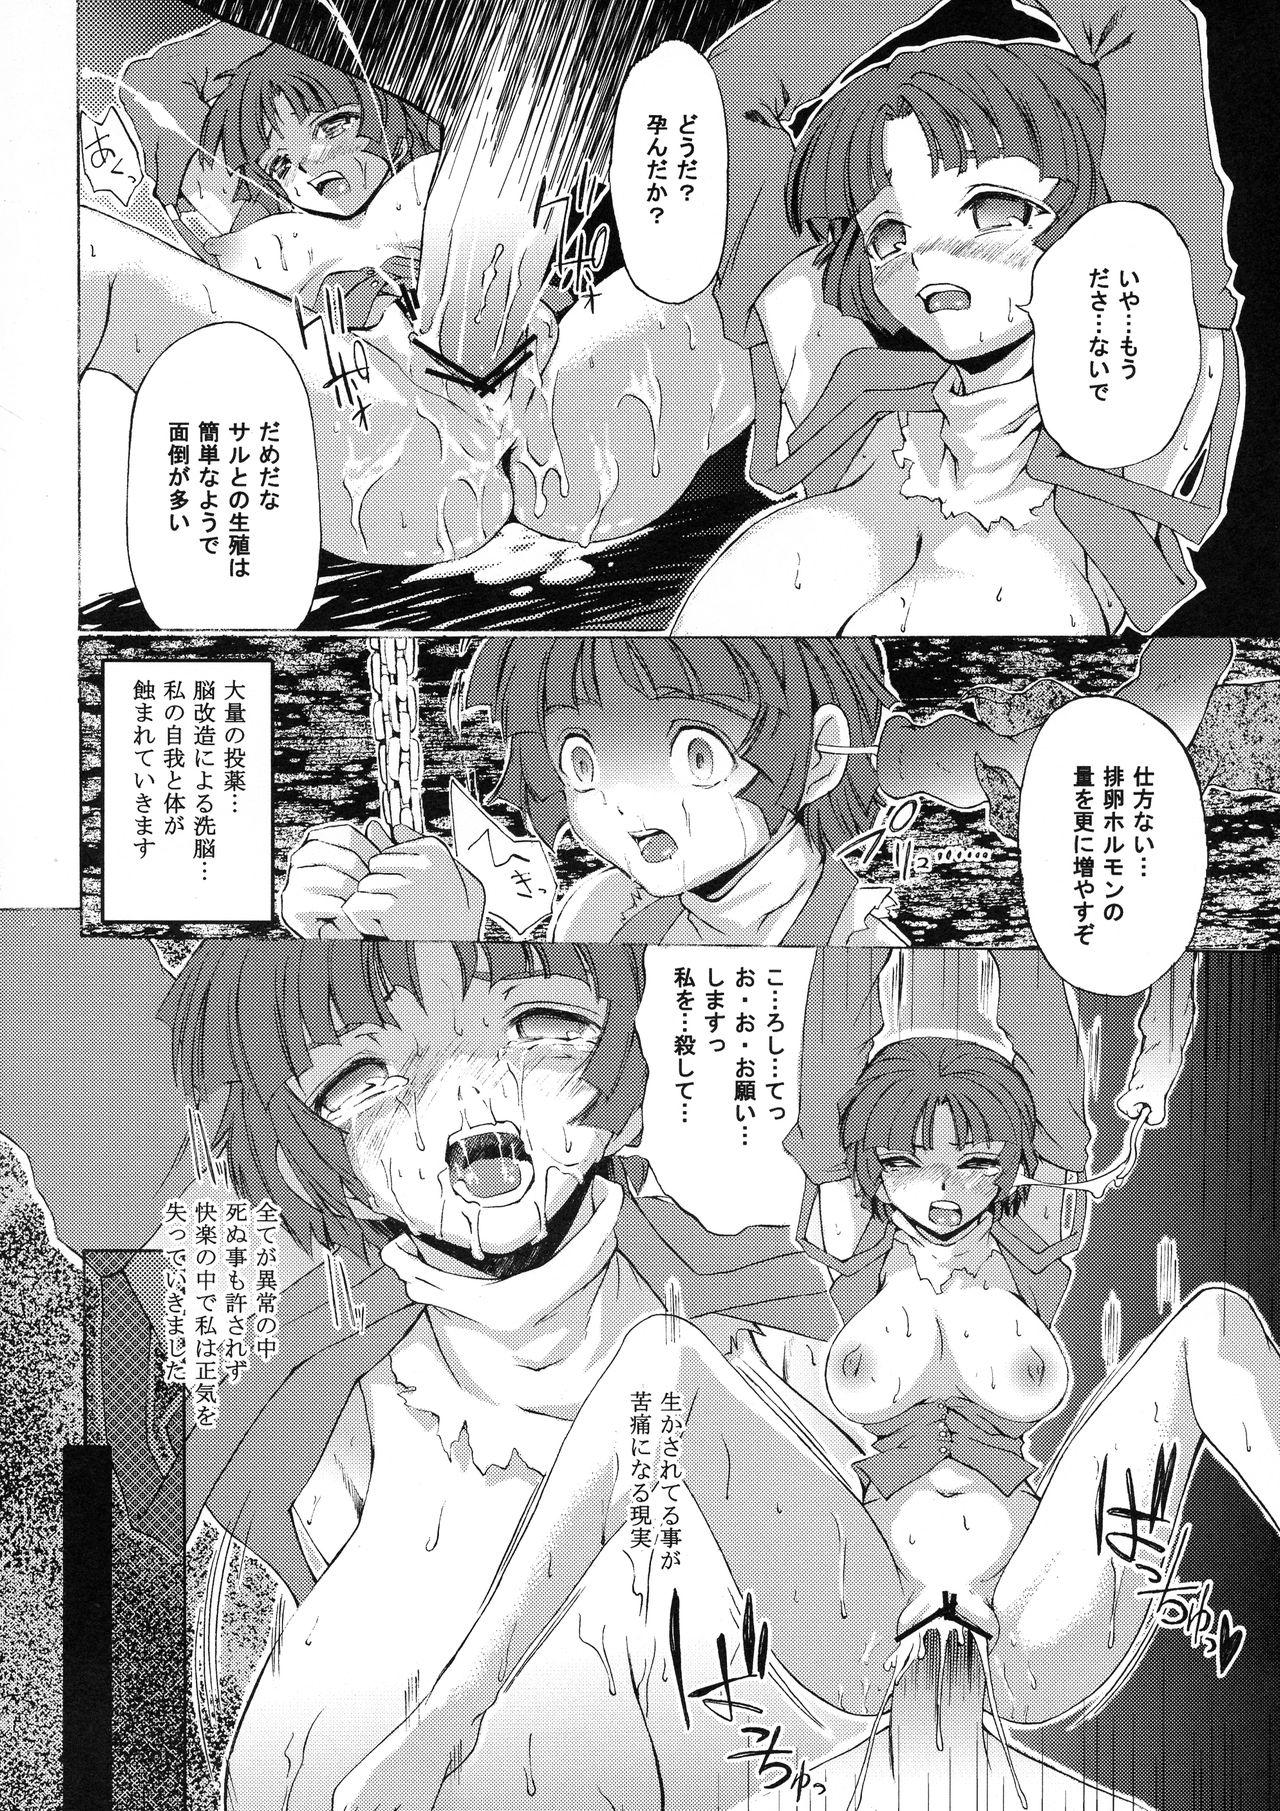 Taiwan MECHANICAL SPAWN - Super robot wars Oldvsyoung - Page 8